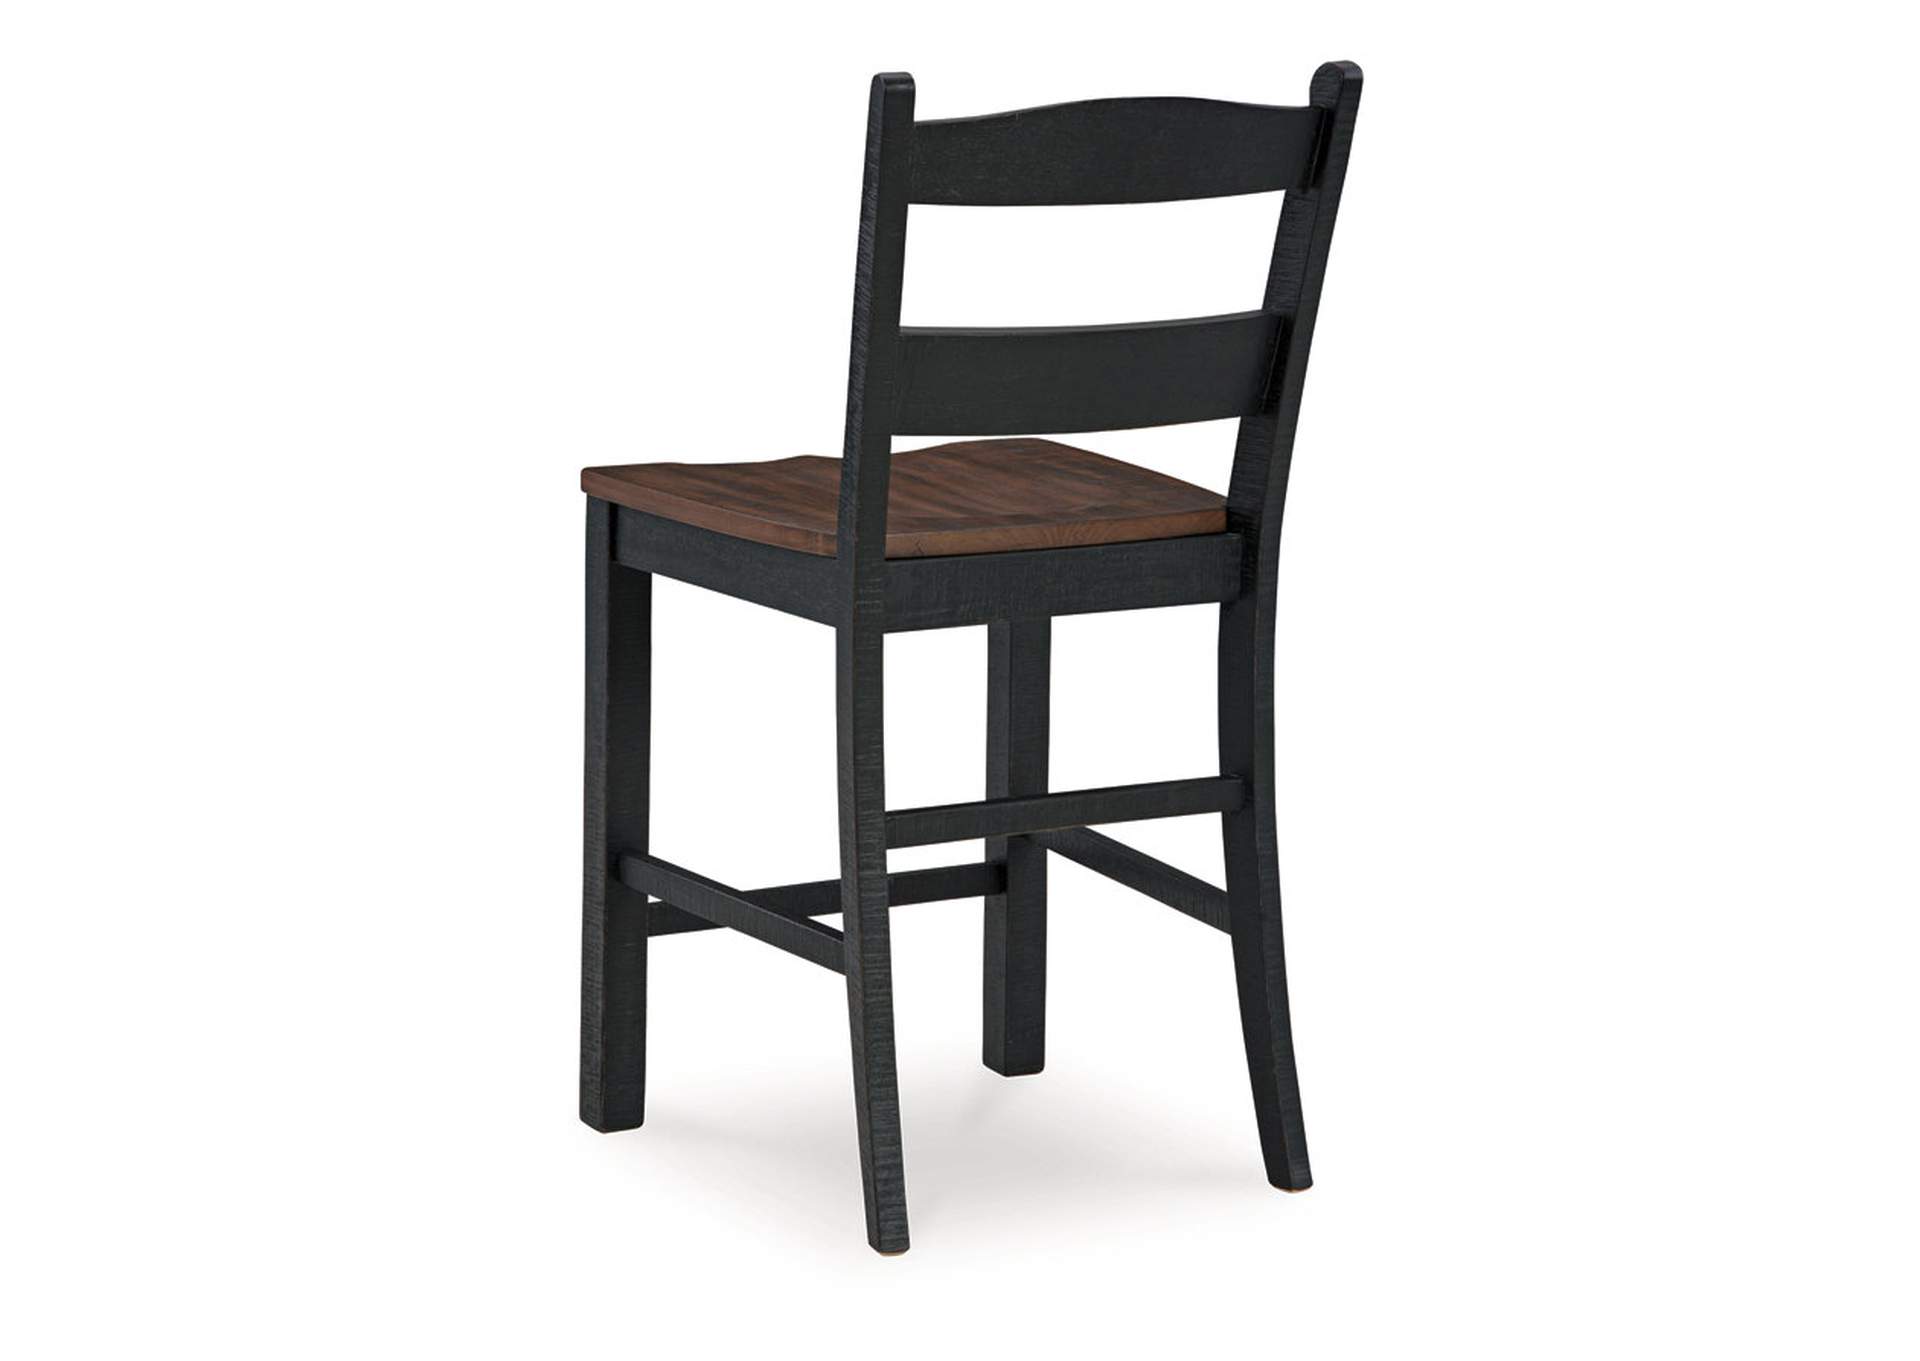 Valebeck Counter Height Barstool,Signature Design By Ashley